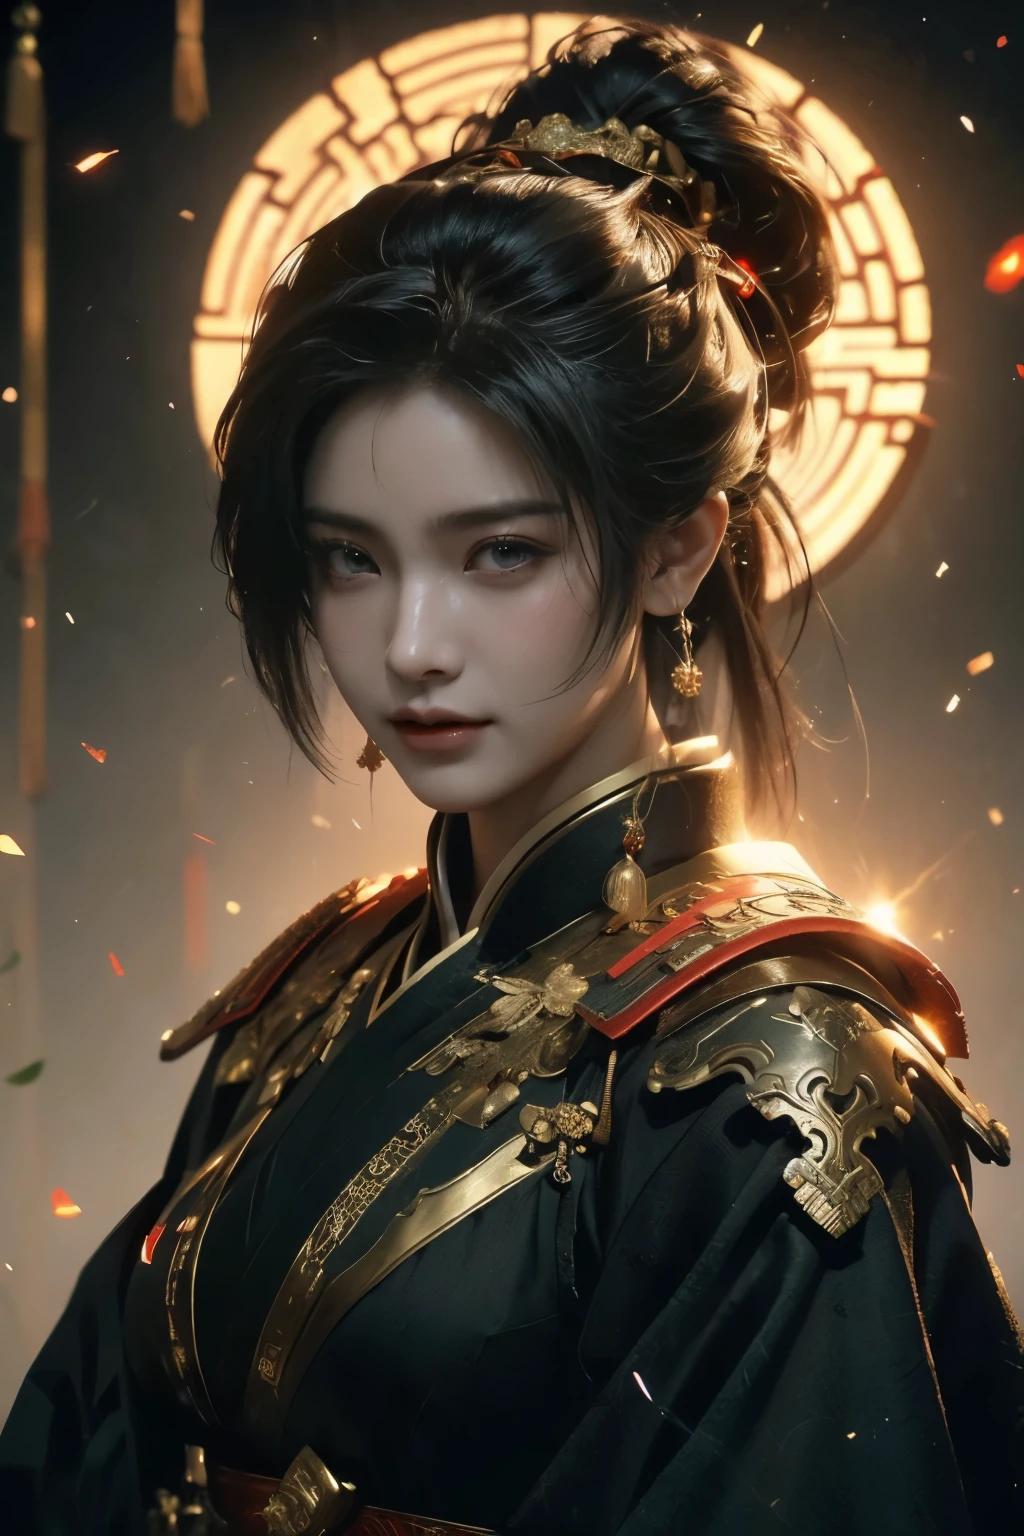 Game art，The best picture quality，Highest resolution，8K，(A bust photograph)，(Portrait from bust:1.5)，(Head close-up)，(Rule of thirds)，Unreal Engine 5 rendering works， (The Girl of the Future)，(Female Warrior)， 
20-year-old girl，(The warrior in ancient China)，(Short ponytail hairstyle)，An eye rich in detail，(Big breasts)，Elegant and noble，indifferent，(Smile)，
(The costume of Chinese swordsman elements，Costumes of ancient Chinese characters，Armor，The costume is red and gold，Heavy armour，Joint Armor)，(Chinese Hanfu:1.3)，figure，Fantasy style，
Photo poses，Field background，Movie lights，Ray tracing，Game CG，((3D Unreal Engine))，oc rendering reflection pattern